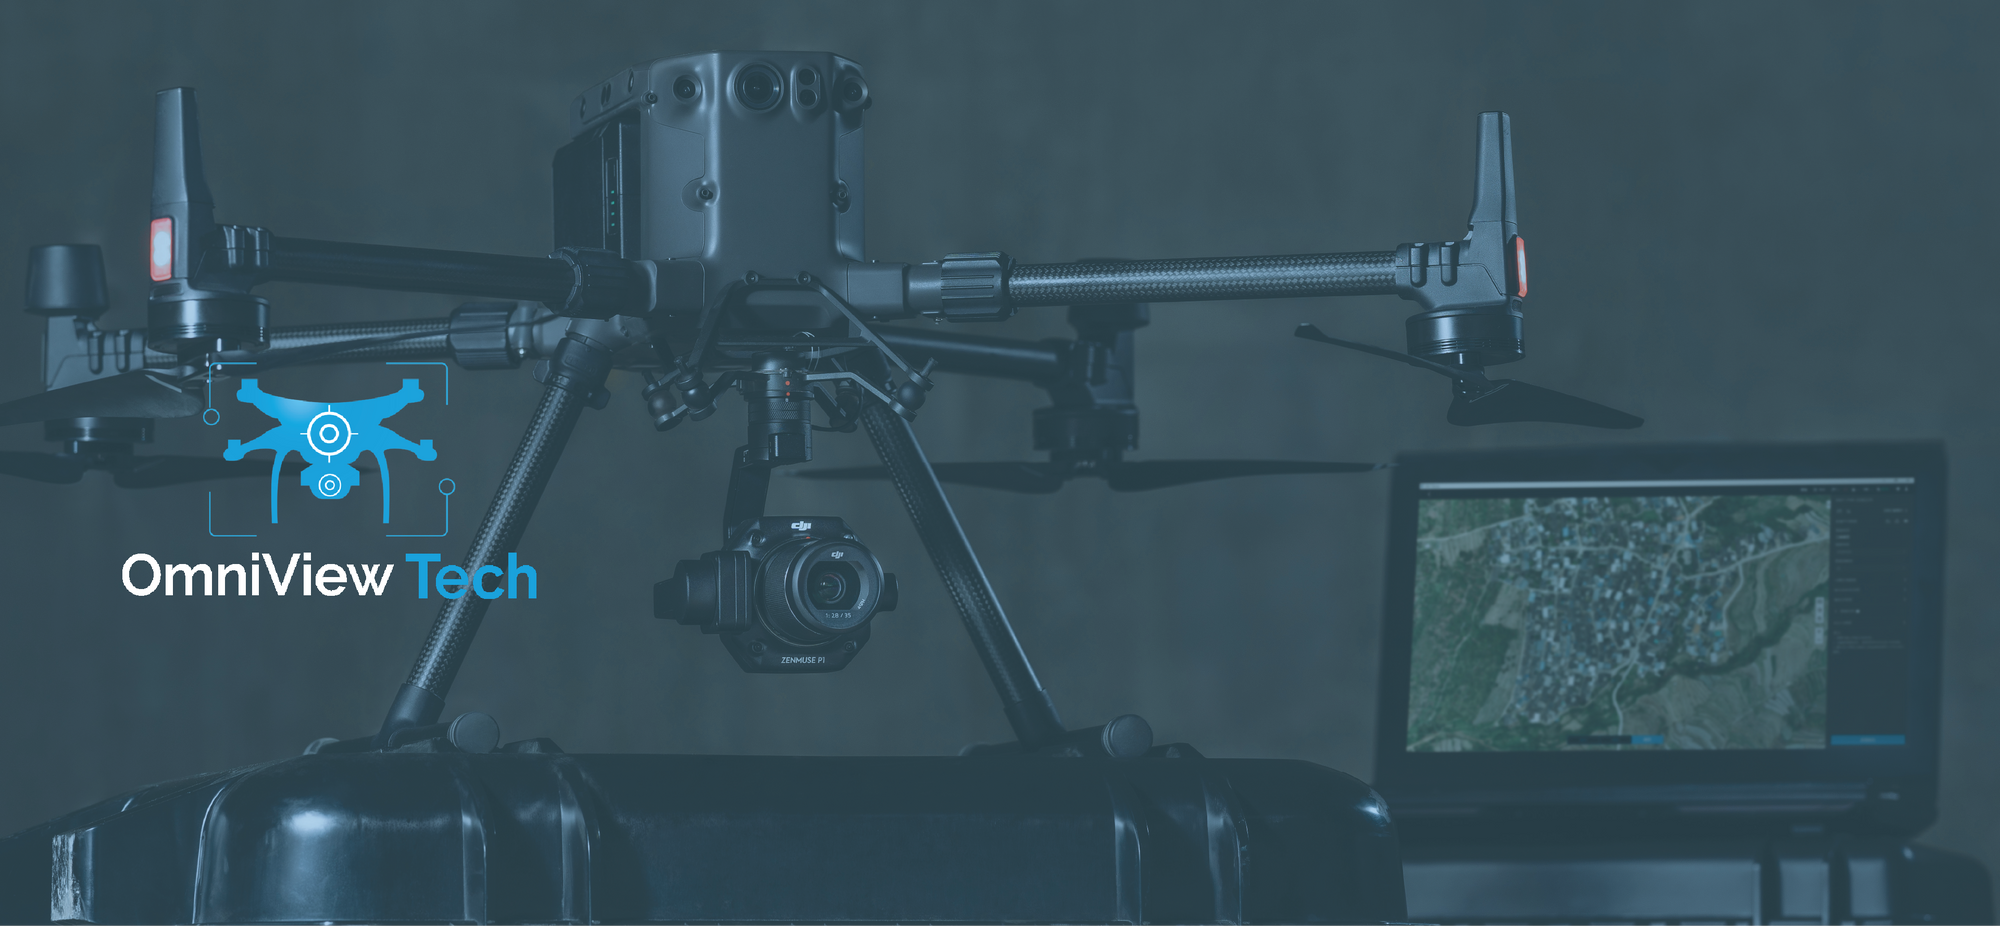 Zenmuse P1 - The New Standard for Aerial Surveying